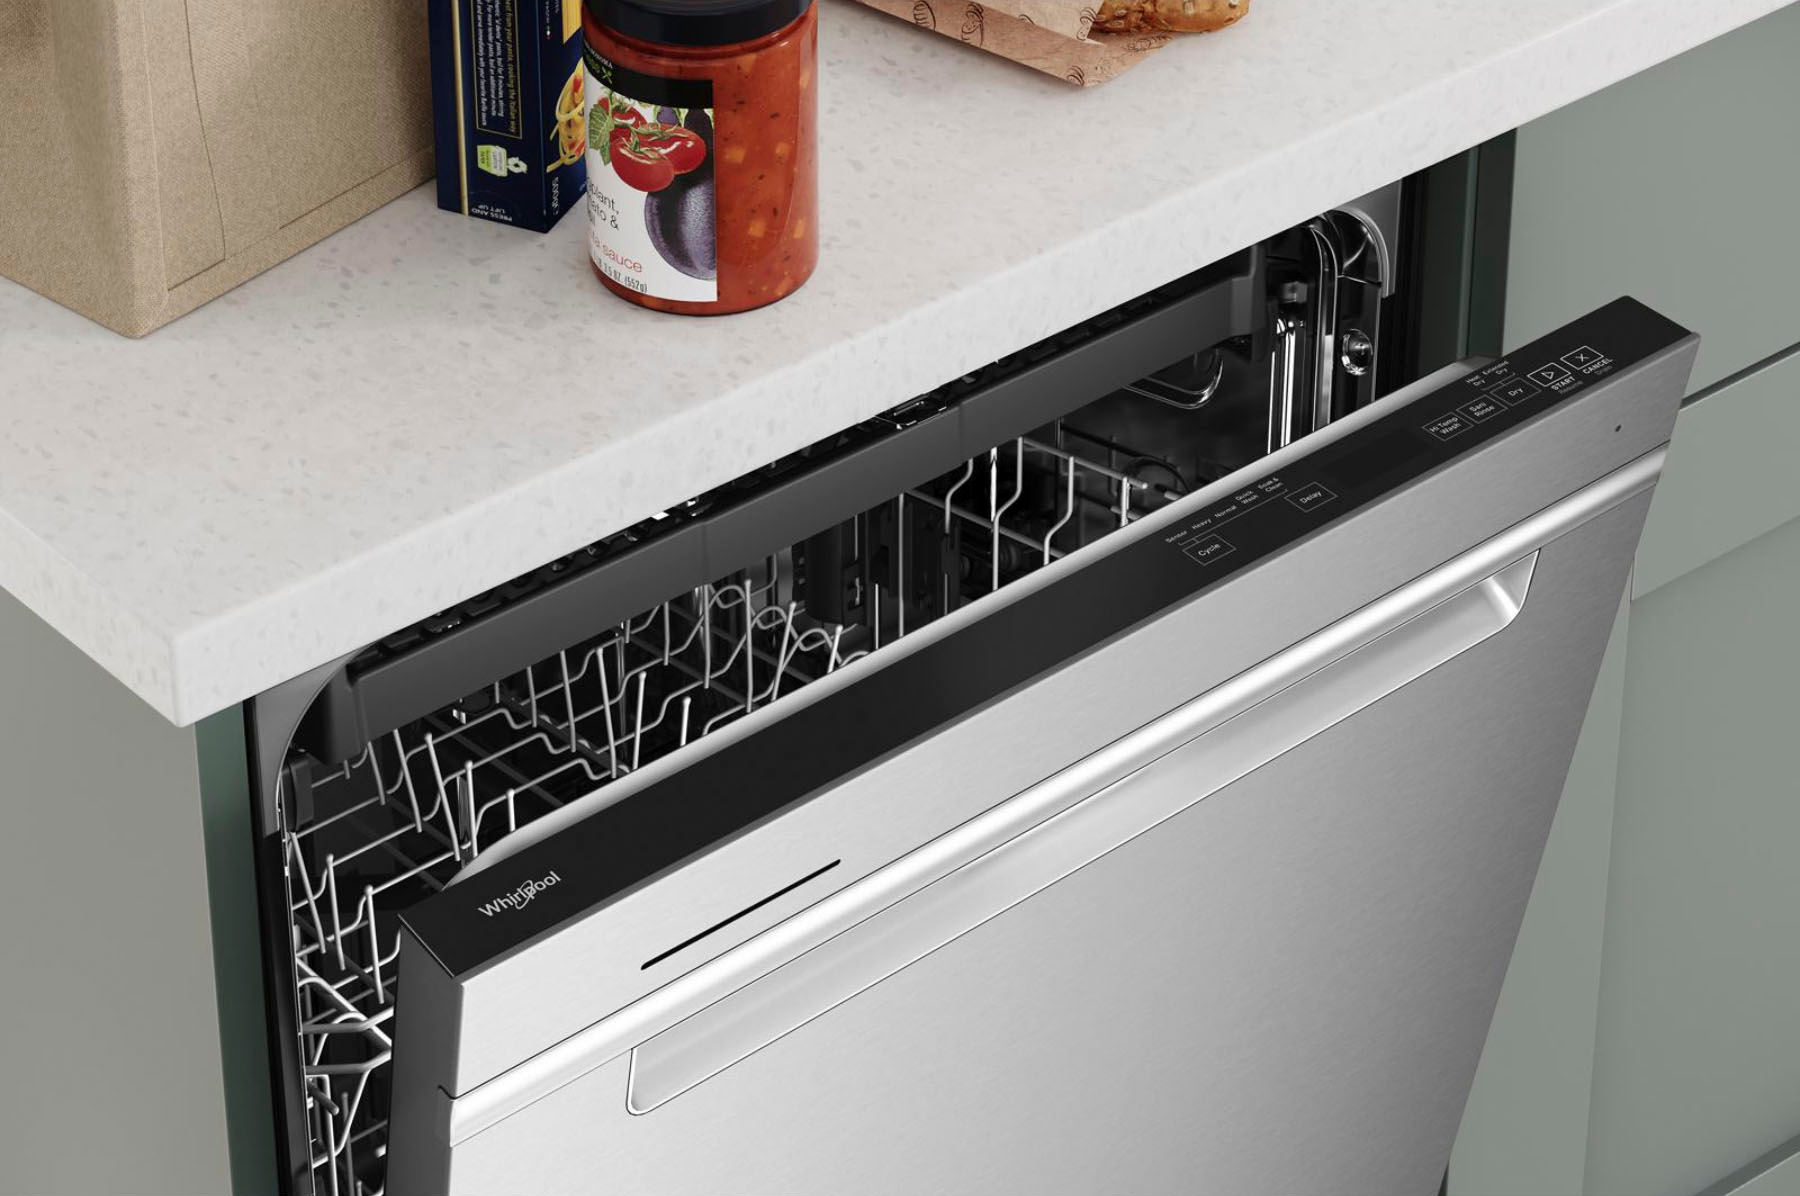 Buy Whirlpool Small-Space Compact Dishwasher with Stainless Steel Tub